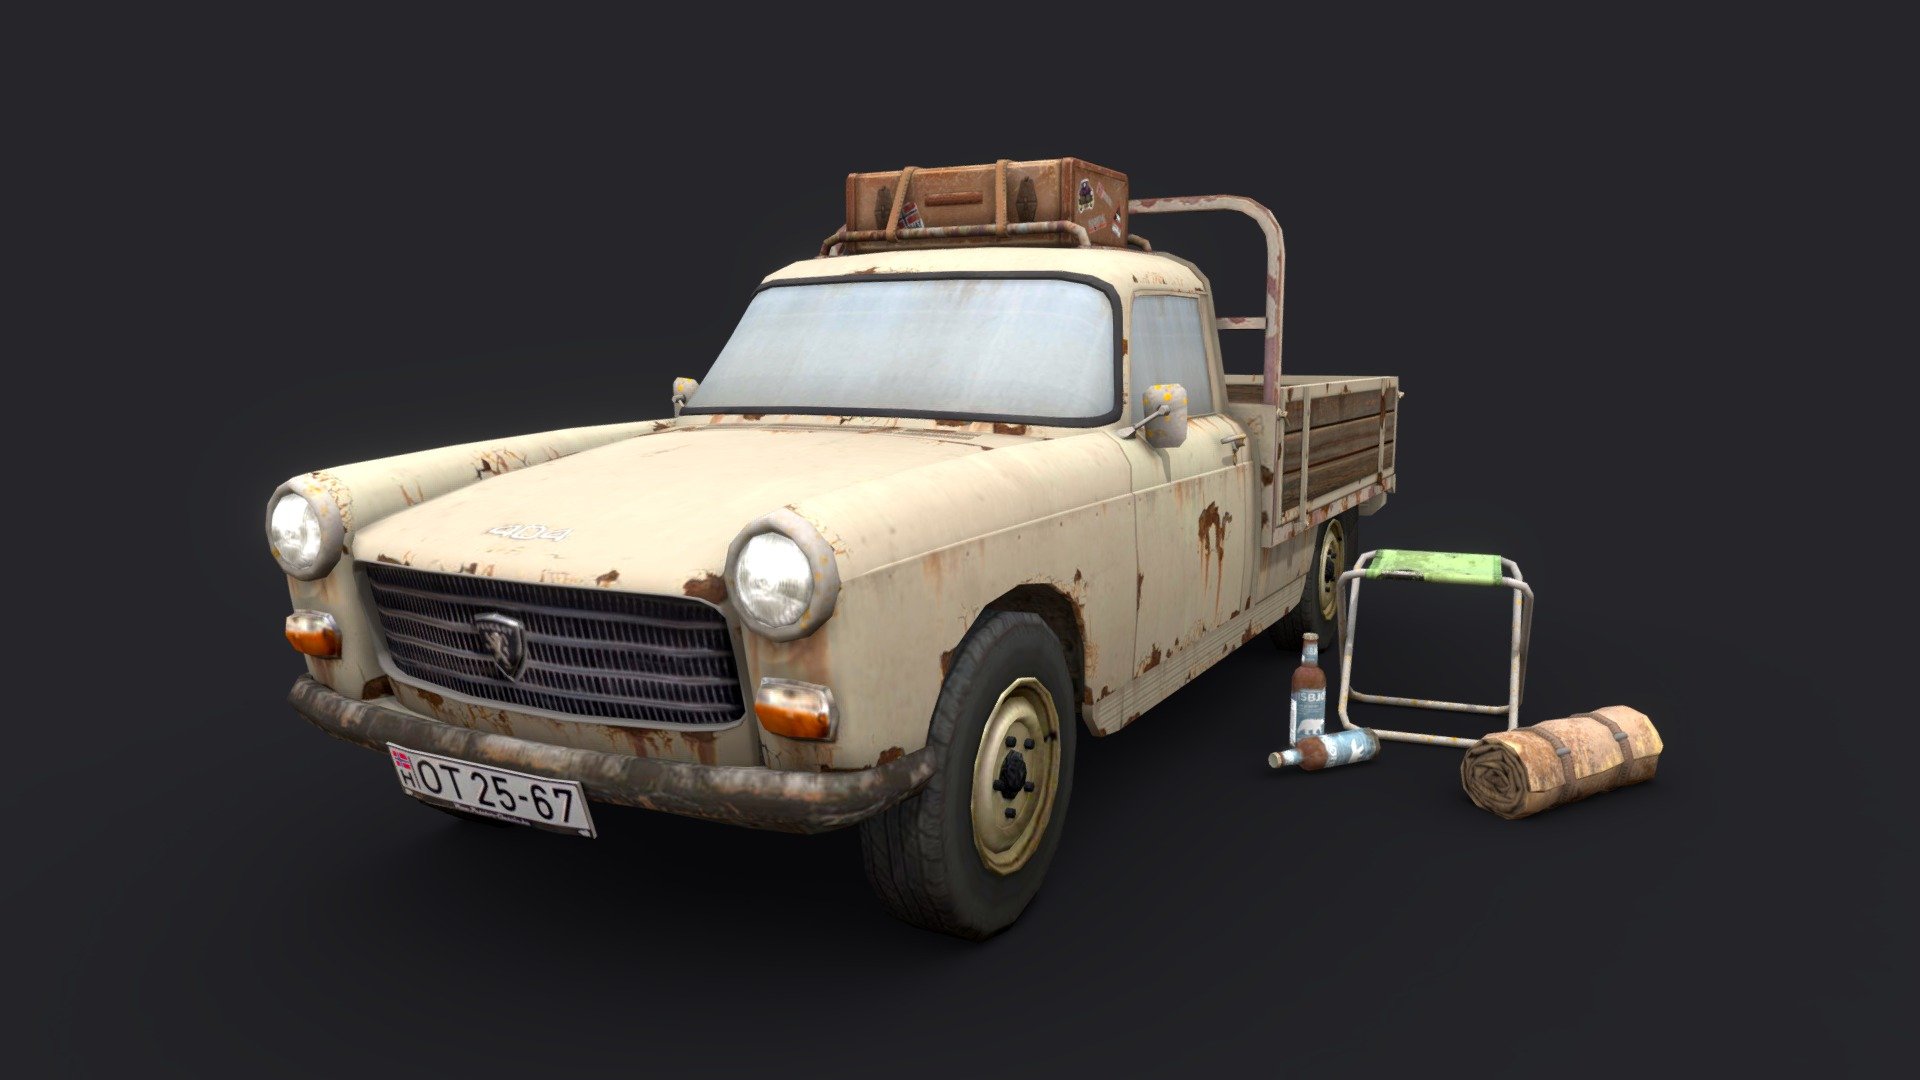 This is the final version of my first 3D assignment for Howest DAE. 

I had a lot of fun working on it, especially the texturing, as we were now allowed to use anything like substance painter, marmoset etc. Everything had to either be done in photoshop or maya and we could pretty much only use an albedo and some transparency. It was a challange to get the textures looking good without any roughness or normals, but I think I learned a lot from it.

Thanks for having a look :) - DAE 5 Finished props - Forest Loner - 3D model by Jonne Keizer (@JonneKeizer) 3d model